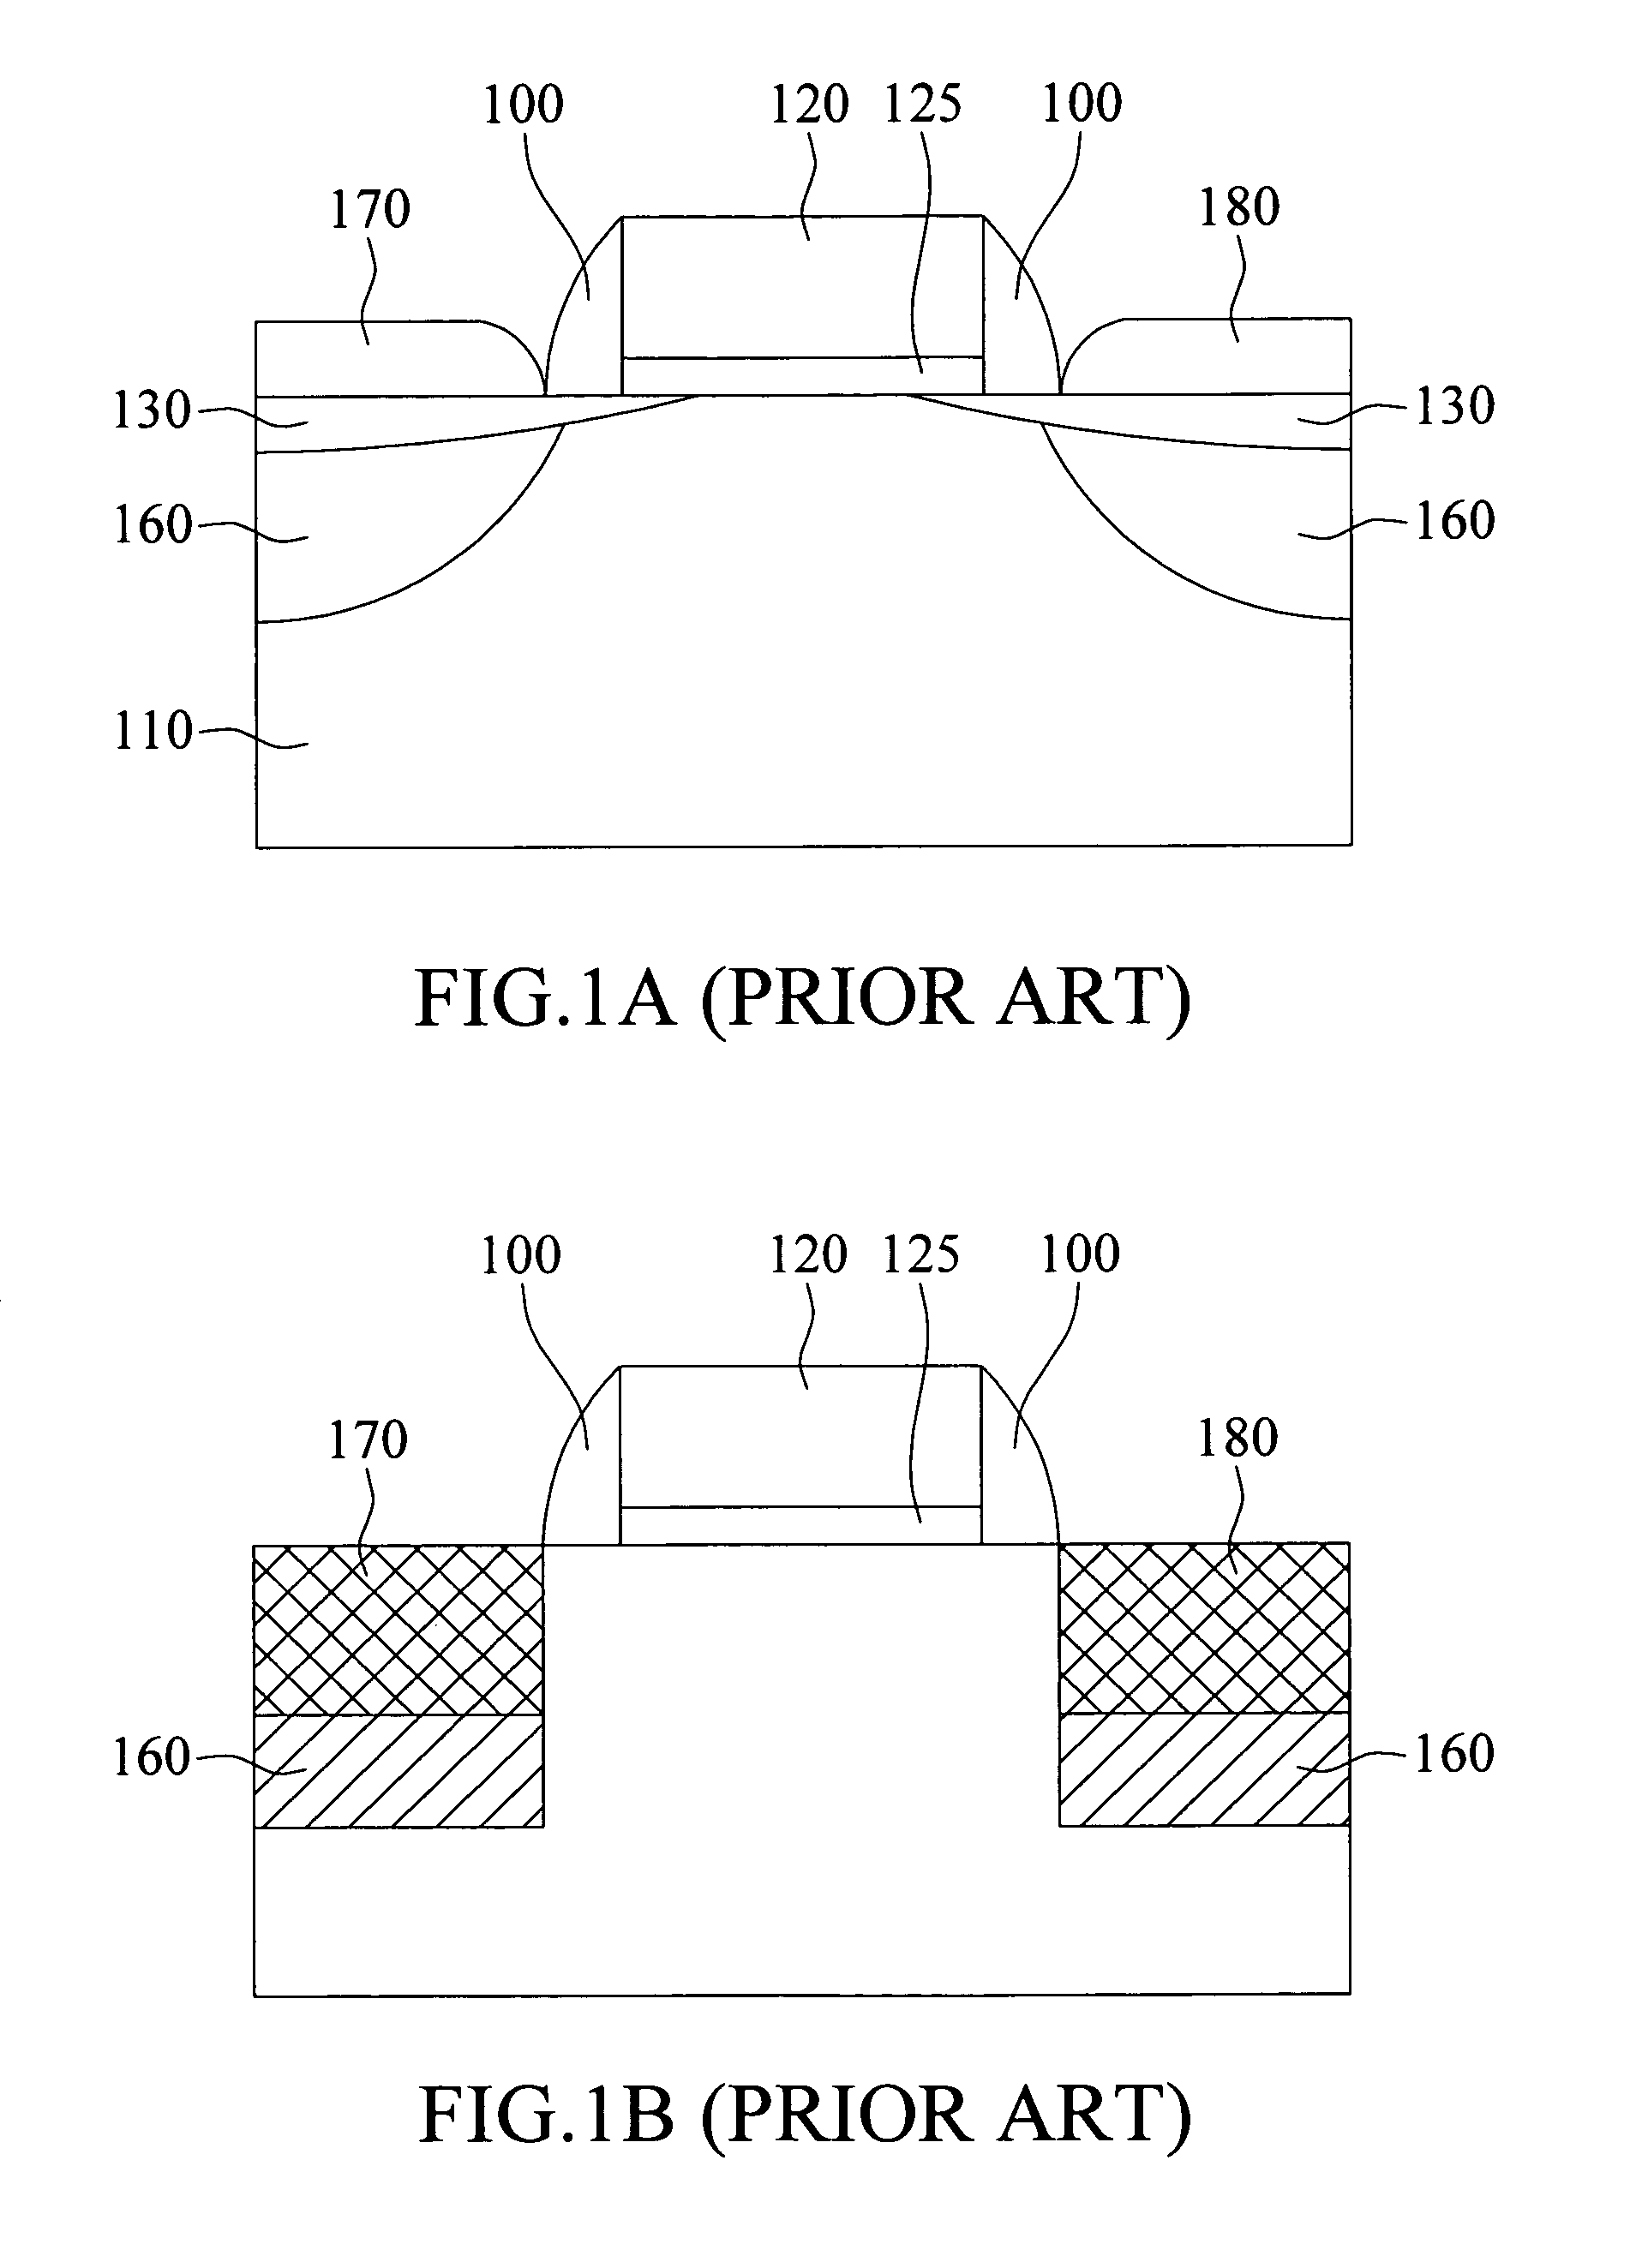 Method for manufacturing a semiconductor device with less leakage current induced by carbon implant